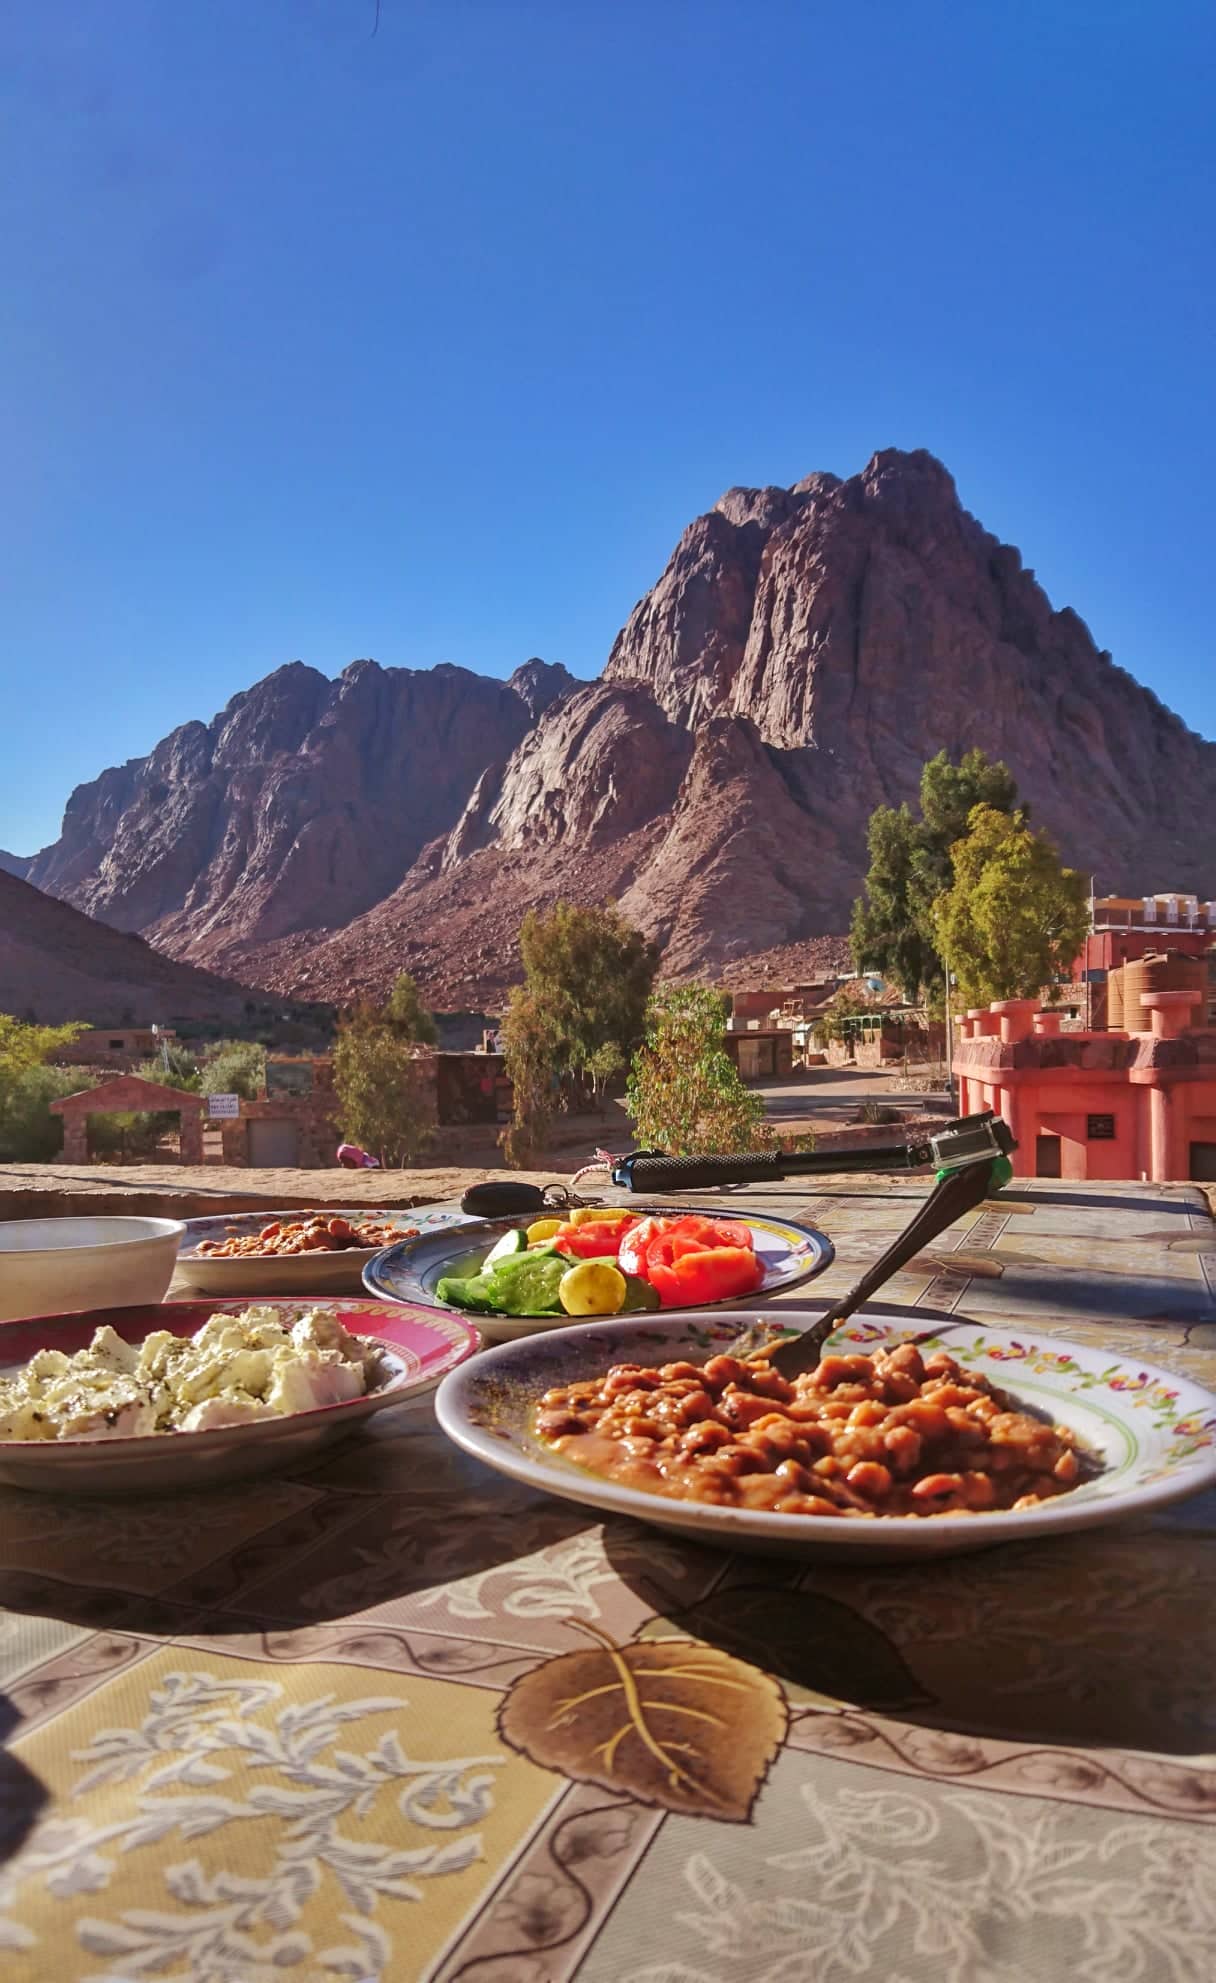 What "the" perfect breakfast view looks like by Youssef El-Rifai